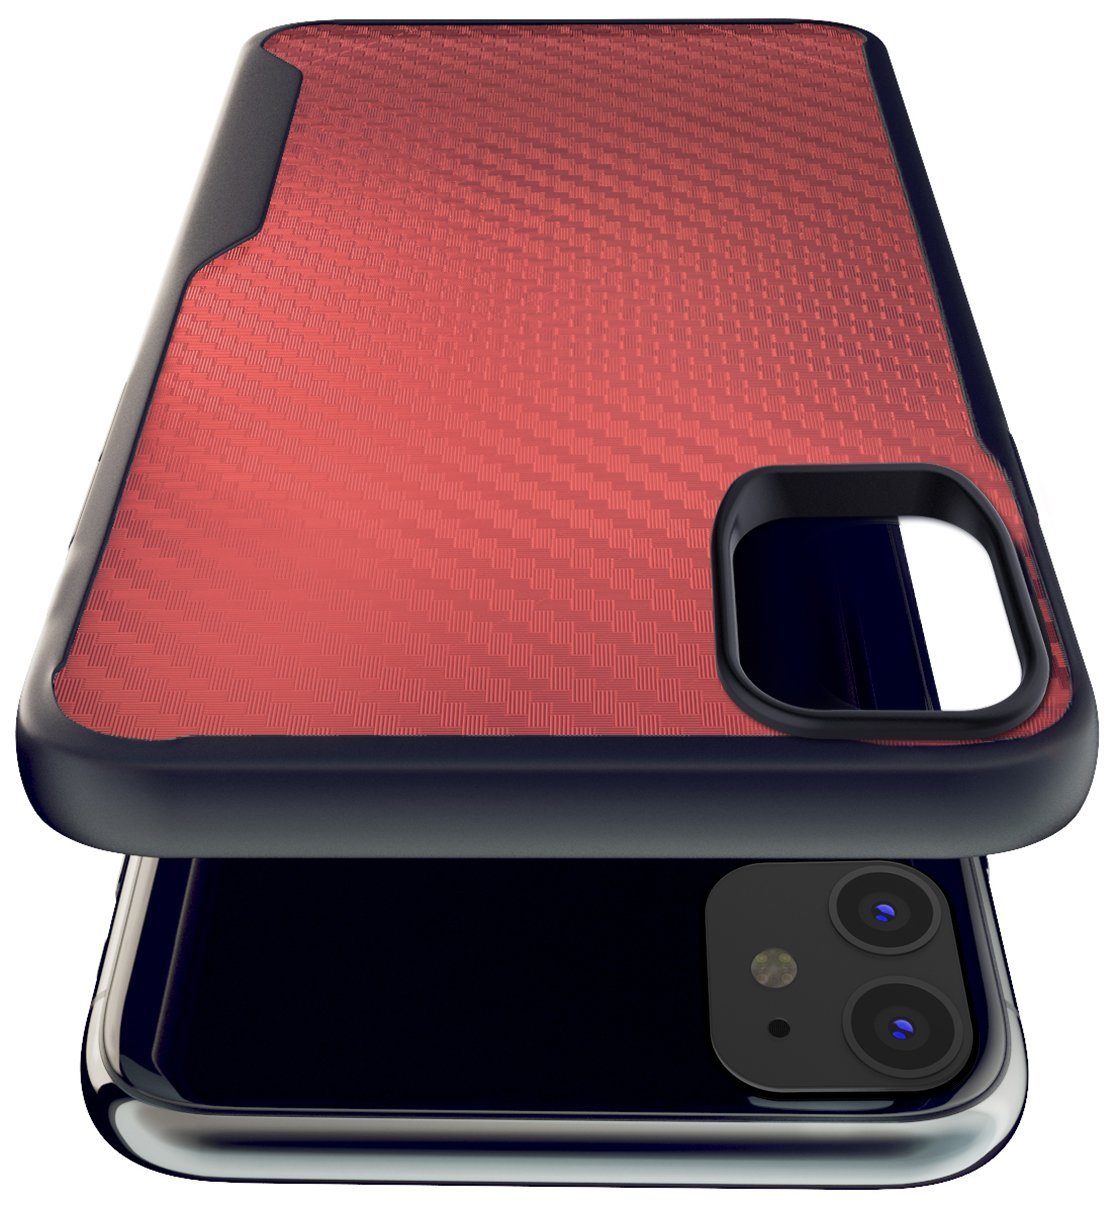 iPhone 11 Kitoo Carbon Fiber Pattern Case Red